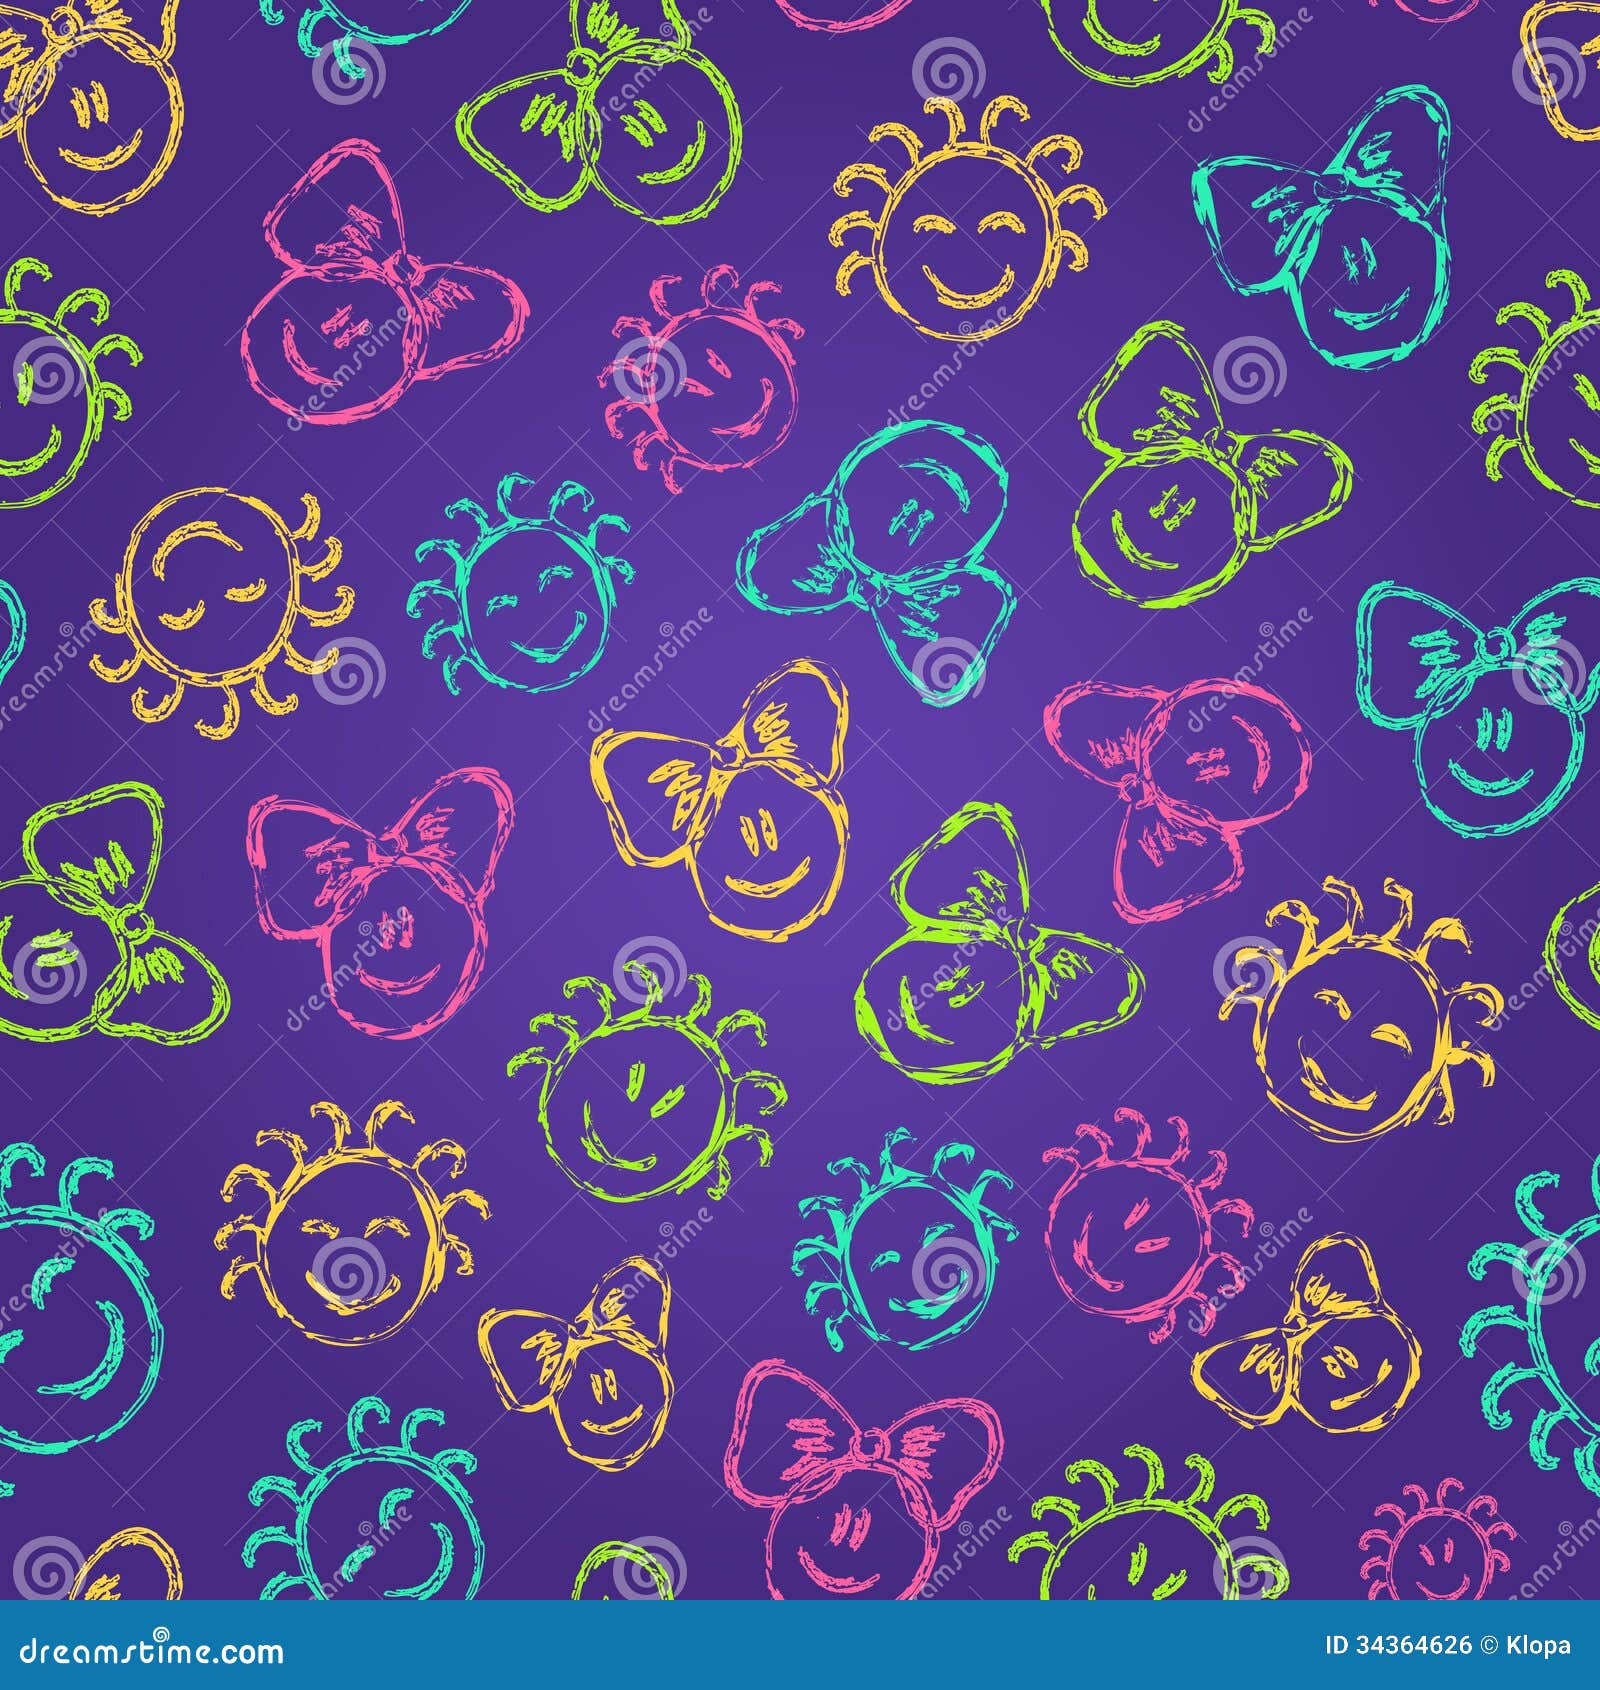 cute themes tumblr free Free Colorful With Kid Faces Pattern Cute Royalty Seamless